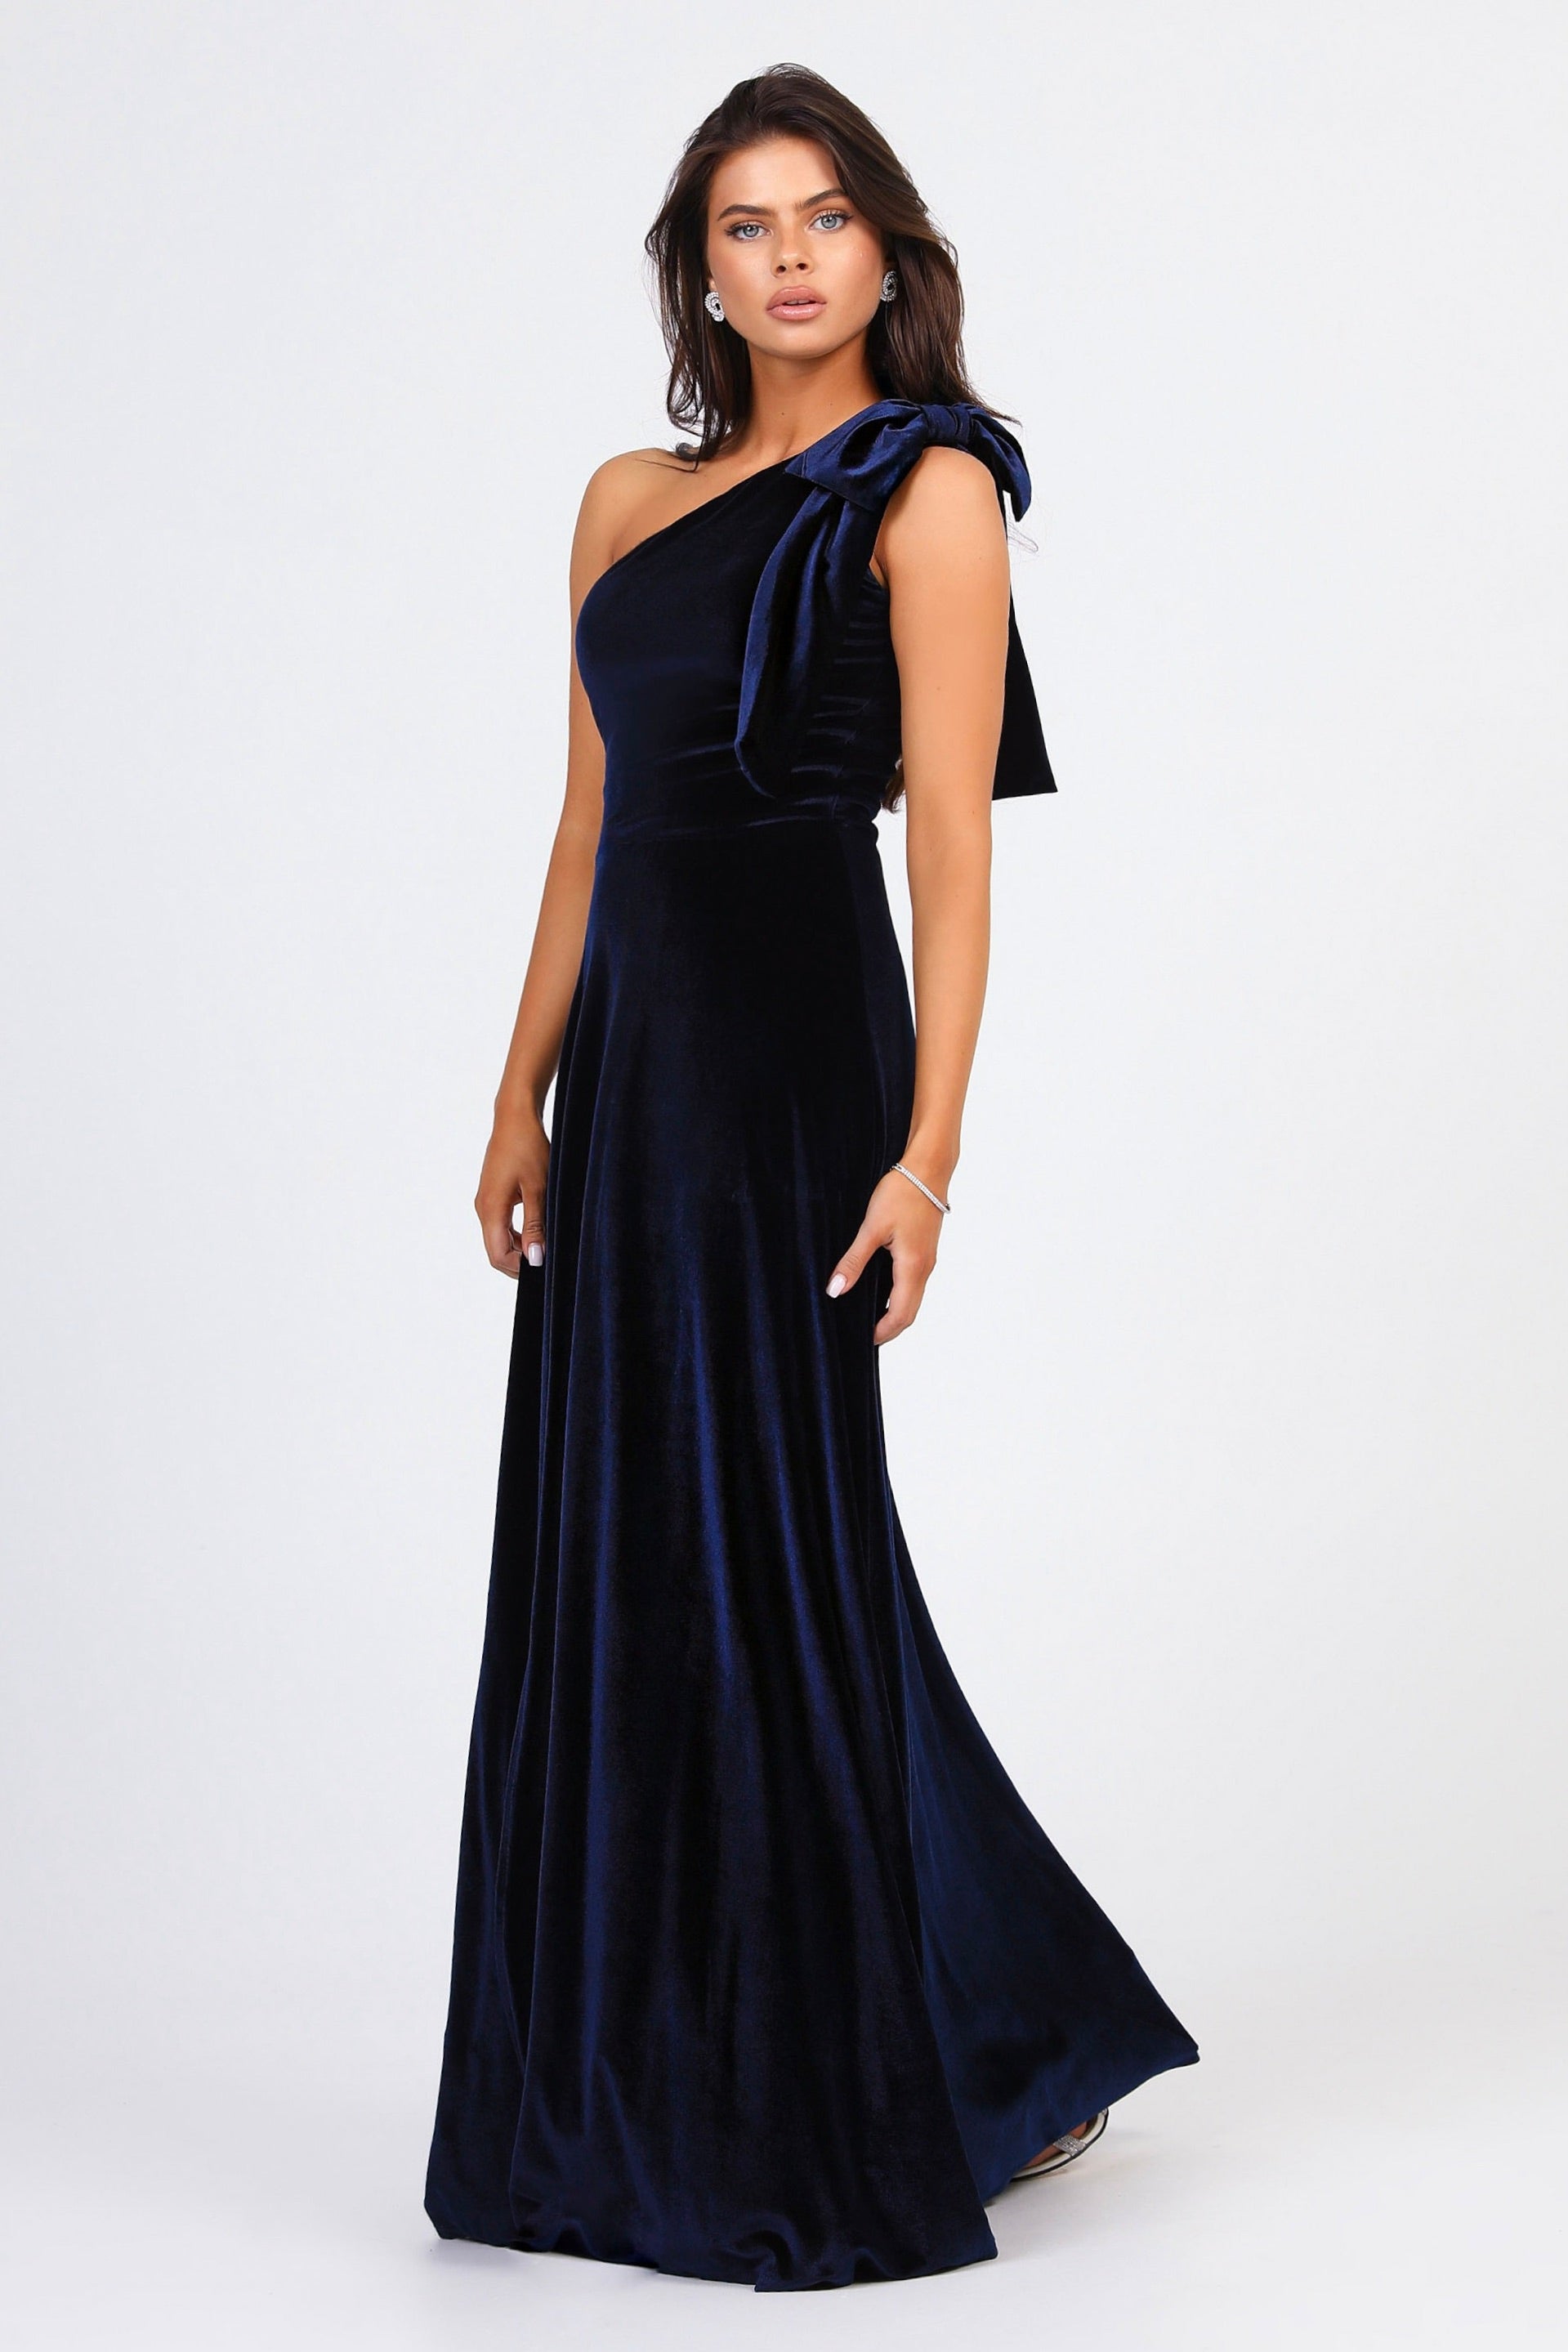 Royal Blue Velvet Sweetheart Blue Velvet Prom Dress With Crystal Sequin And  Beaded Detailing Sleeveless Evening Gown For Womens Party And Formal Events  From Sweety_wedding, $144.26 | DHgate.Com